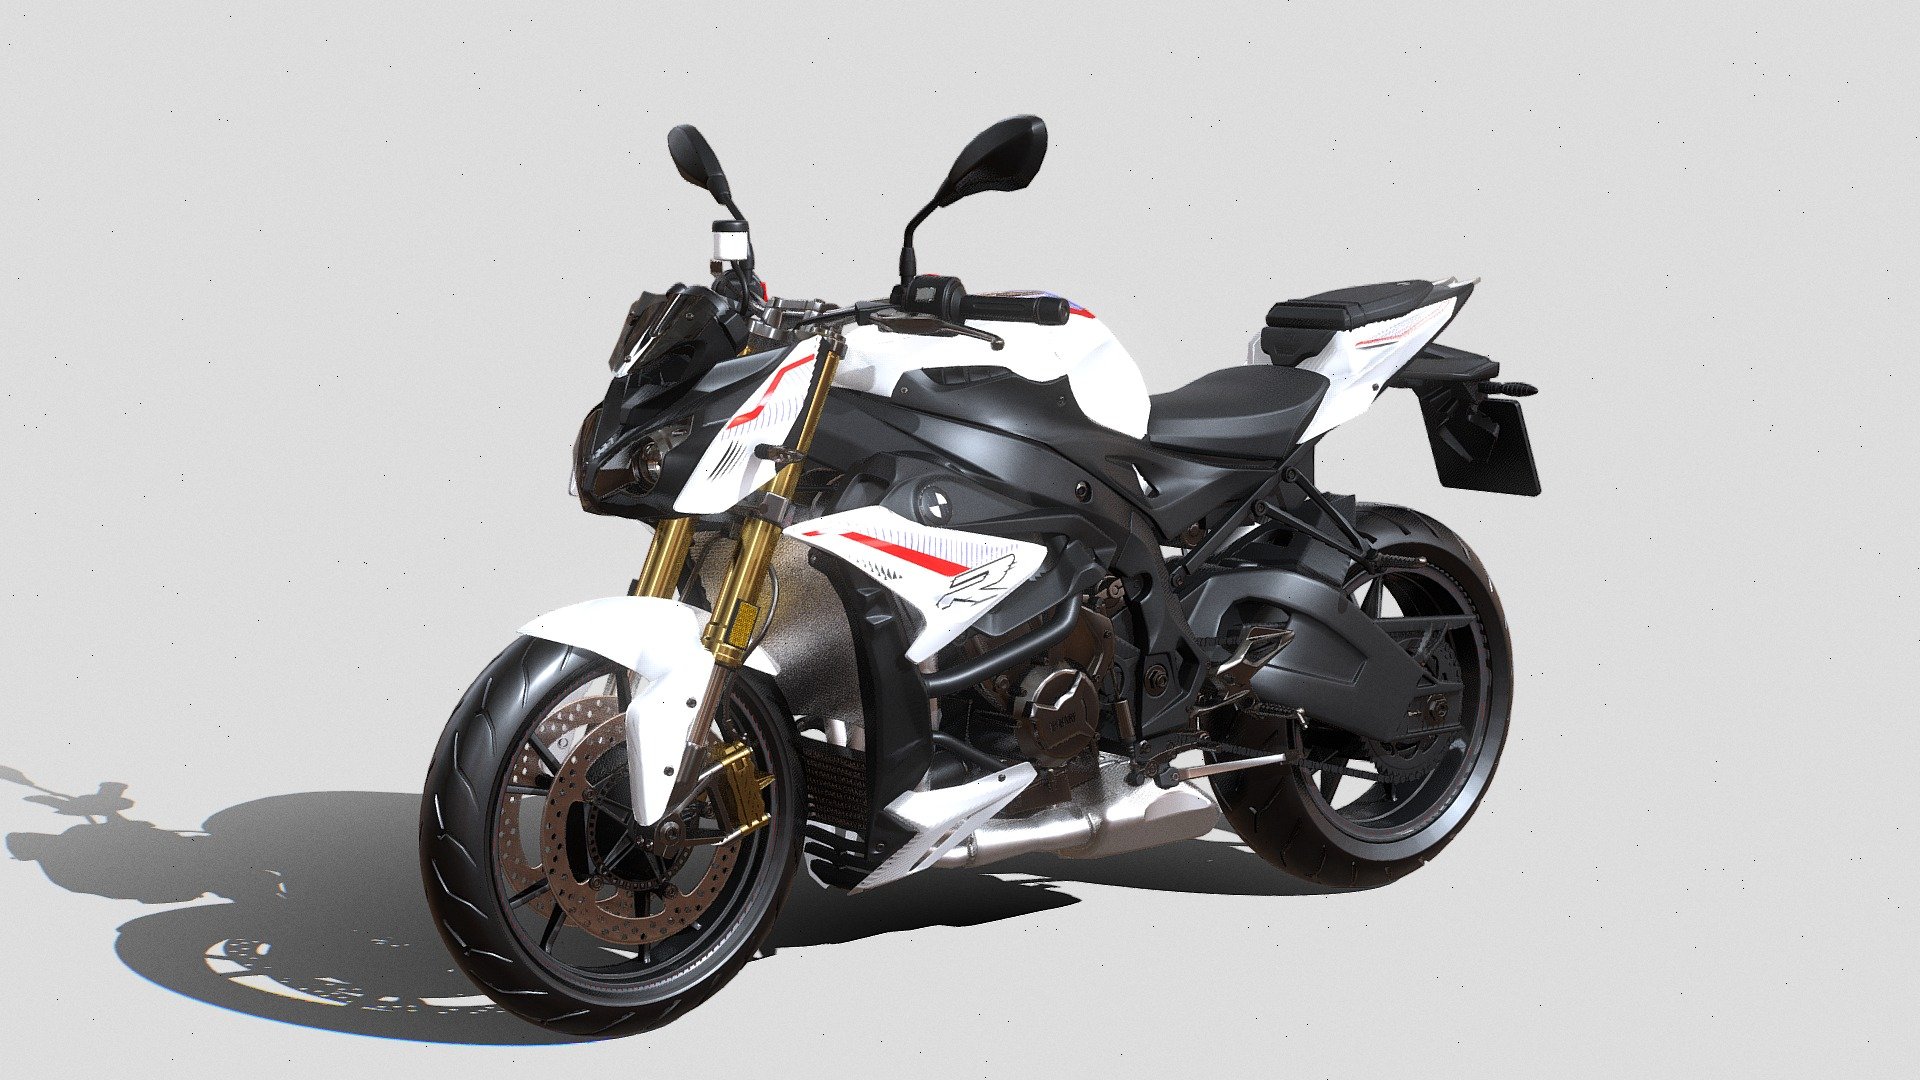 CHECK OUR MORE NODELS
A high quality model of BMW S 1000R Game ready VR/AR Compatible.

Every object has material’s name, you can easily change or apply materials.

Low Poly can be used in VR,Games Etc

Specs: All the textures are in jpg format and UVW wrapped. Model is fully textured with based on real object. All textures and materials are included and mapped in every format. Model does not include any backgrounds or scenes used in preview images. Renders made with Blender in Cycles.

This model is high quality, photo realalistic. The model has a fully textured, detailed design that allows for close-up renders, and was originally modeled and Textured in Blender. Fidelity is optimal up to a 4k render

If you liked my model, please leave some feedback. Thank you!

Hope you like it! Also check out my other models, just click on my user name to see complete gallery 3d model